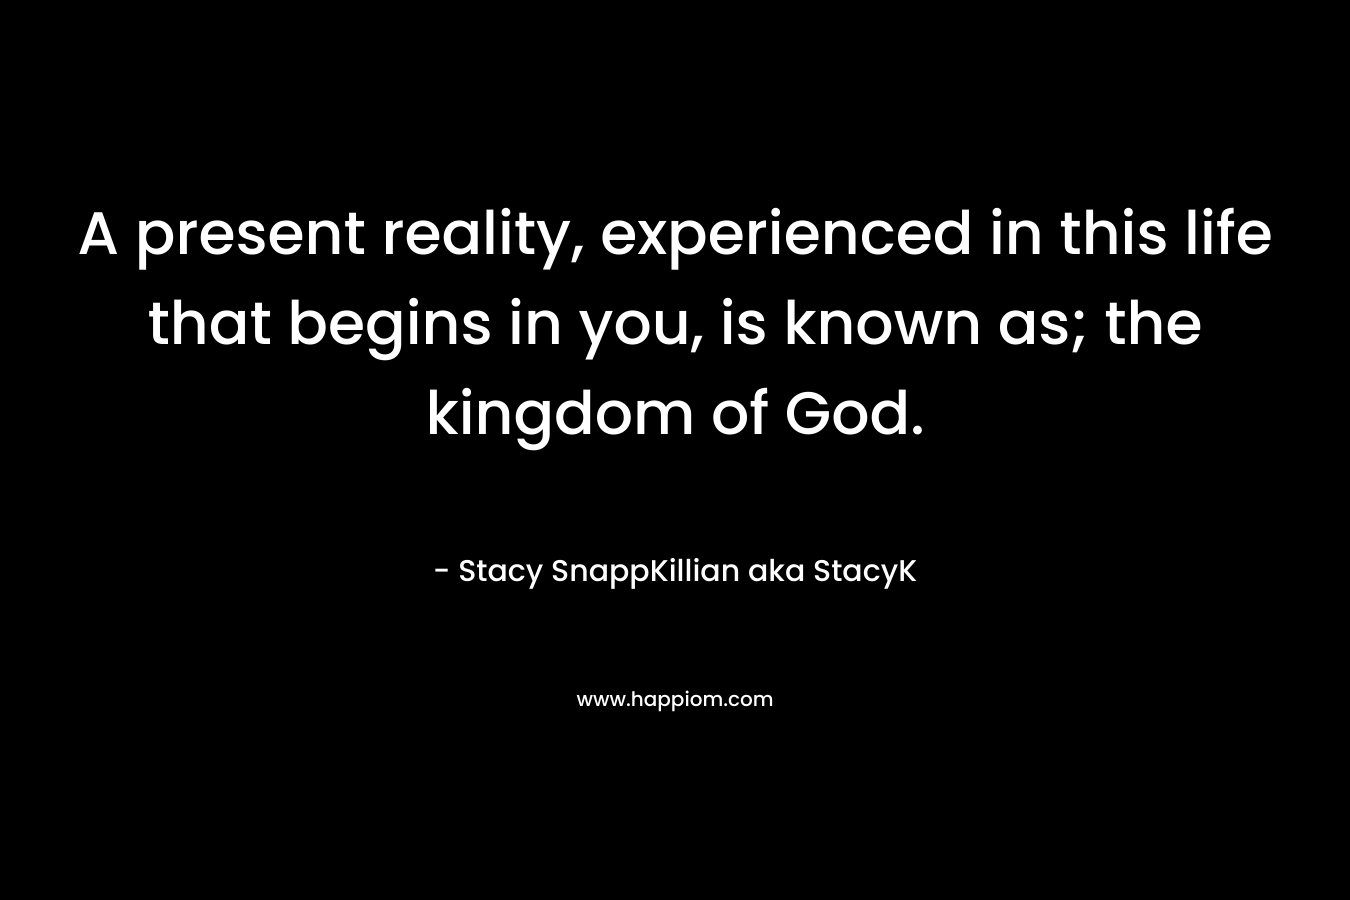 A present reality, experienced in this life that begins in you, is known as; the kingdom of God. – Stacy SnappKillian aka StacyK